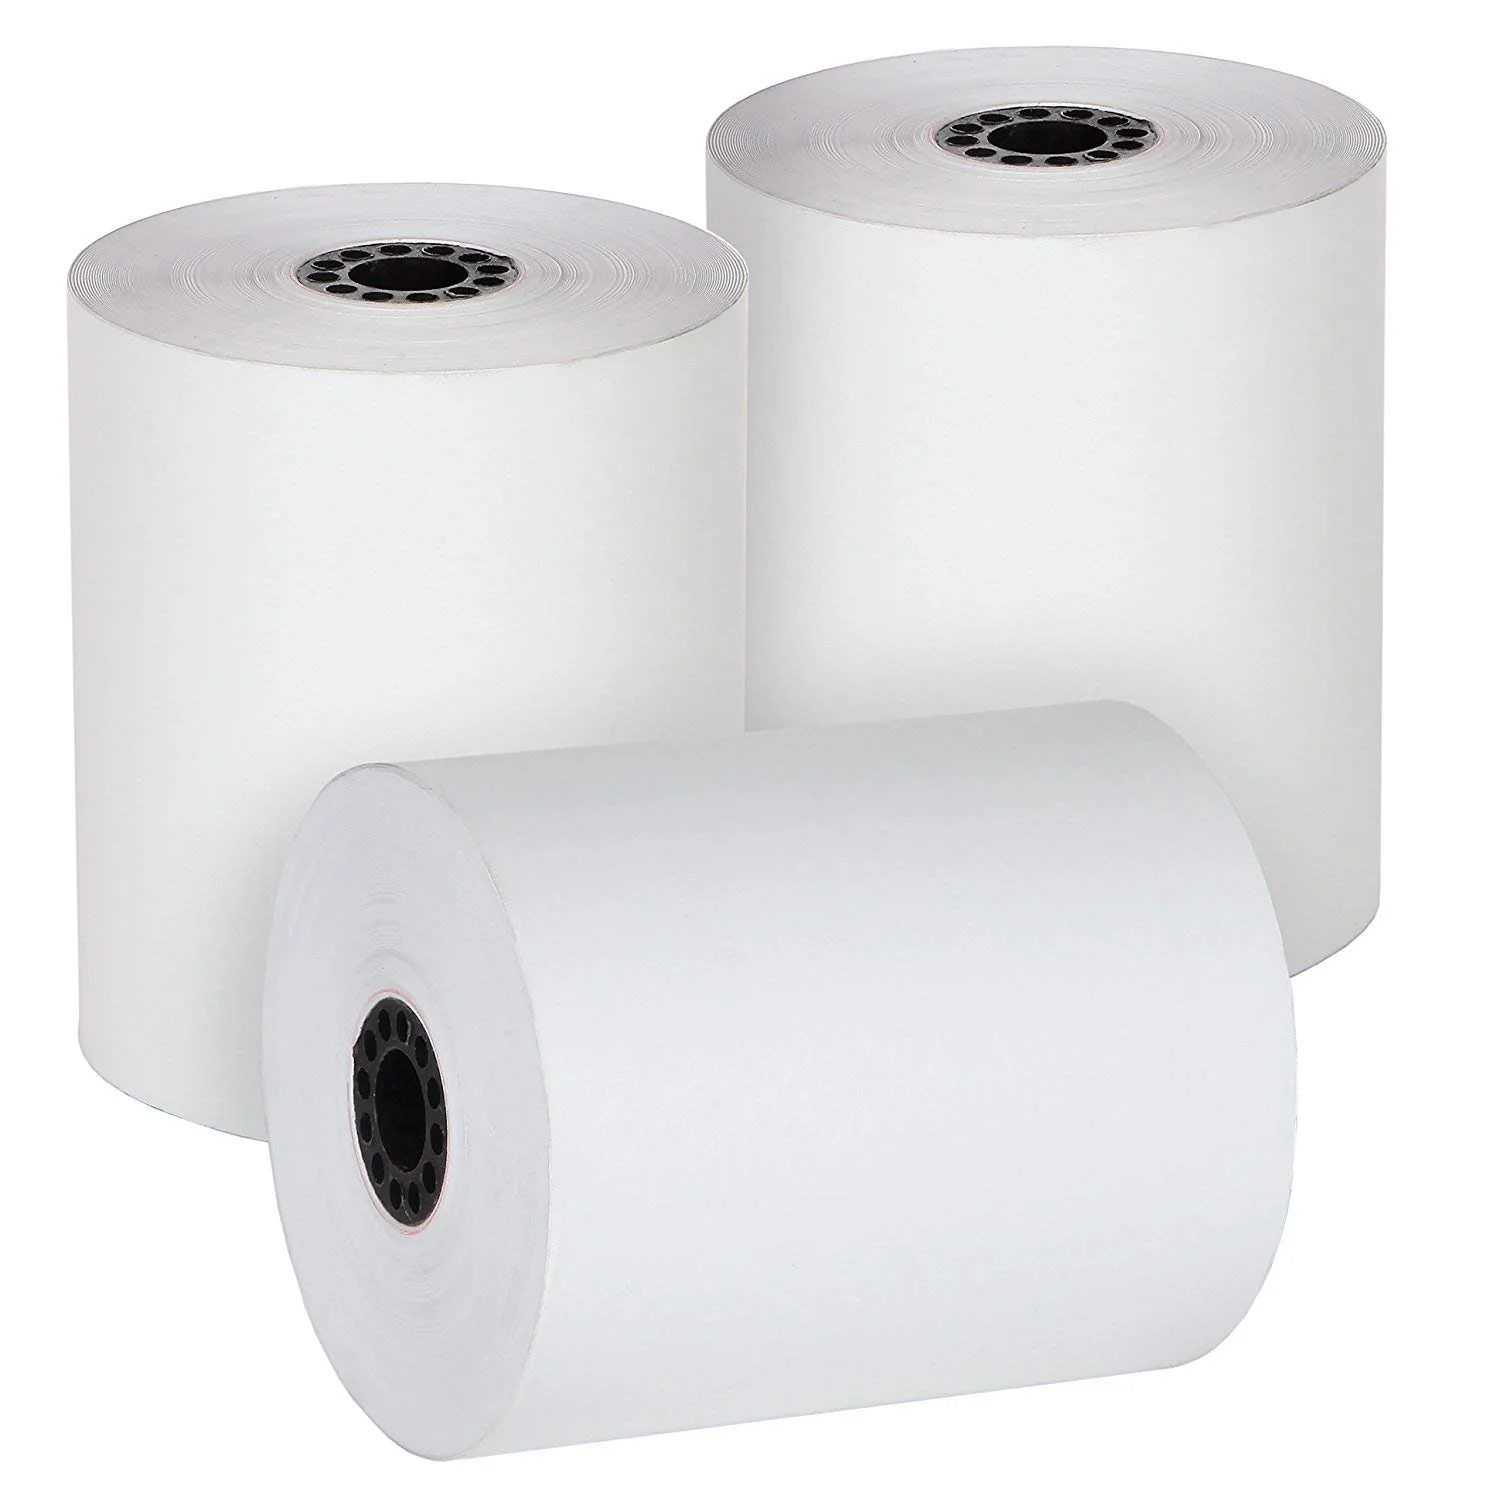 Picture of One-Ply Bond 76mm x 76mm Till Roll (20) White